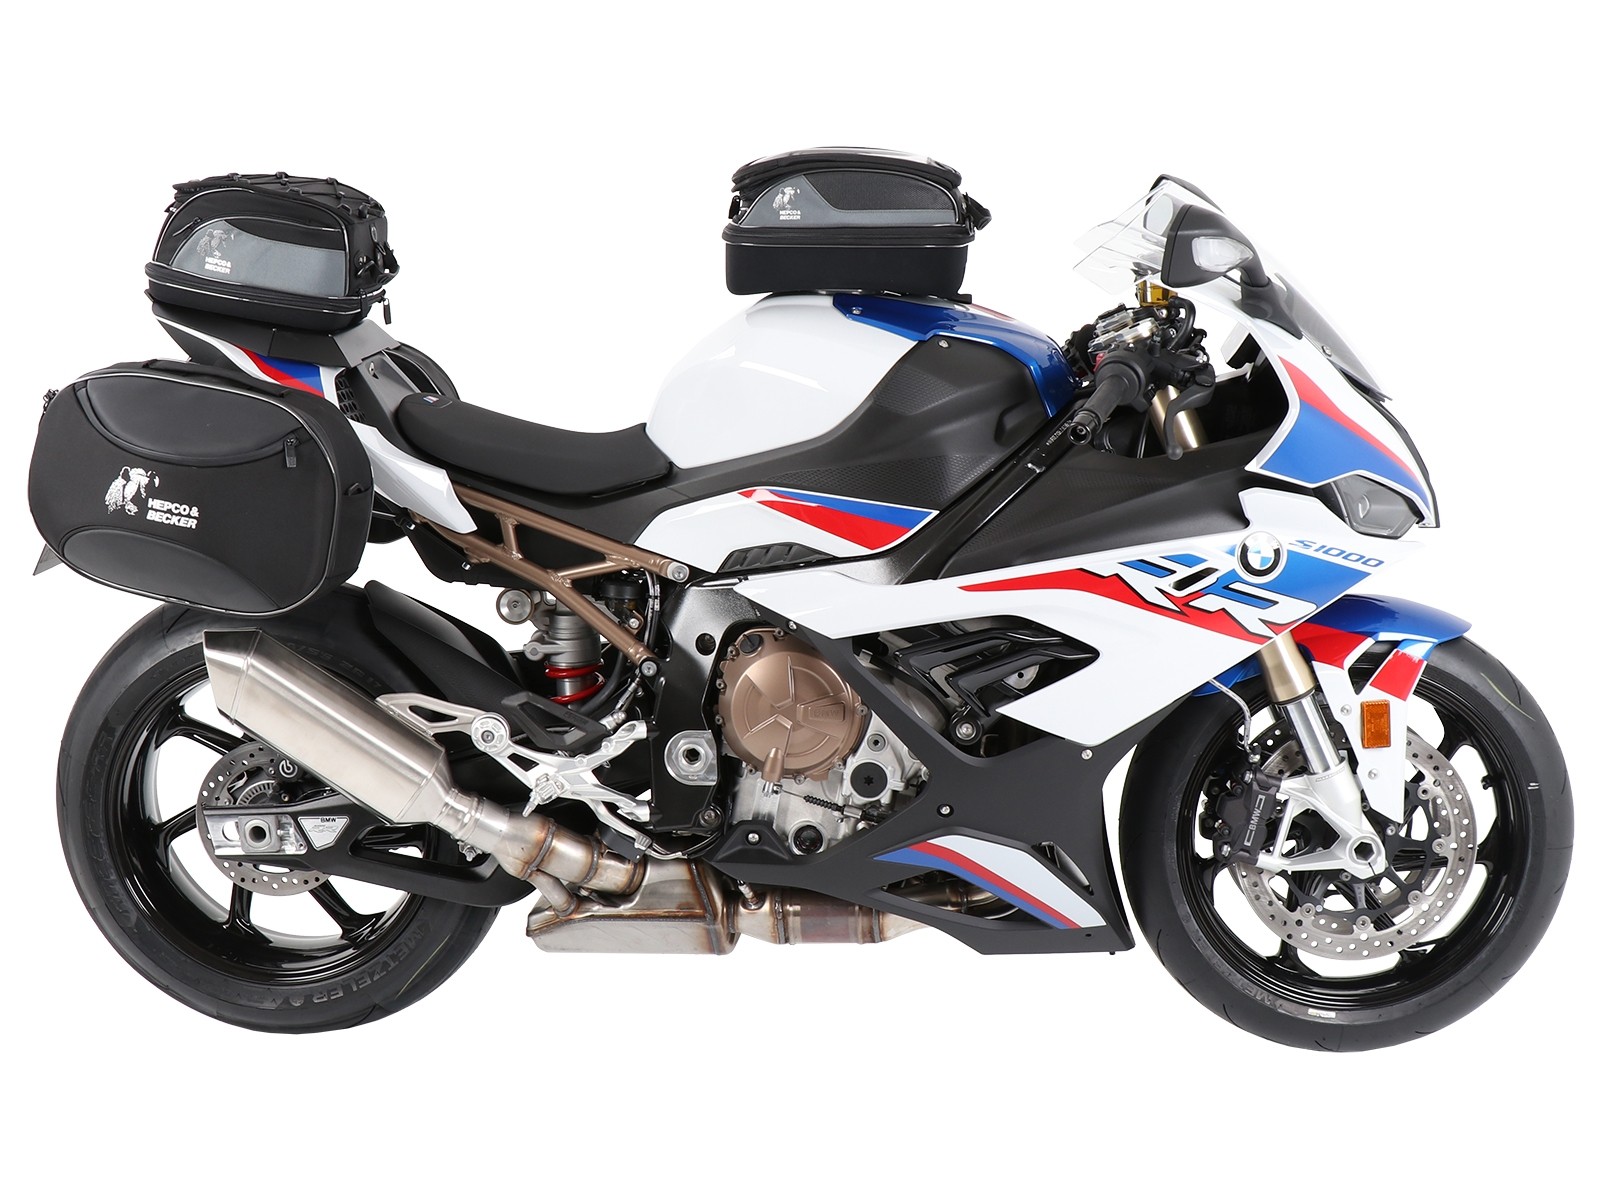 BMW S1000 RR 2019 fitted with luggage by Hepco & Becker